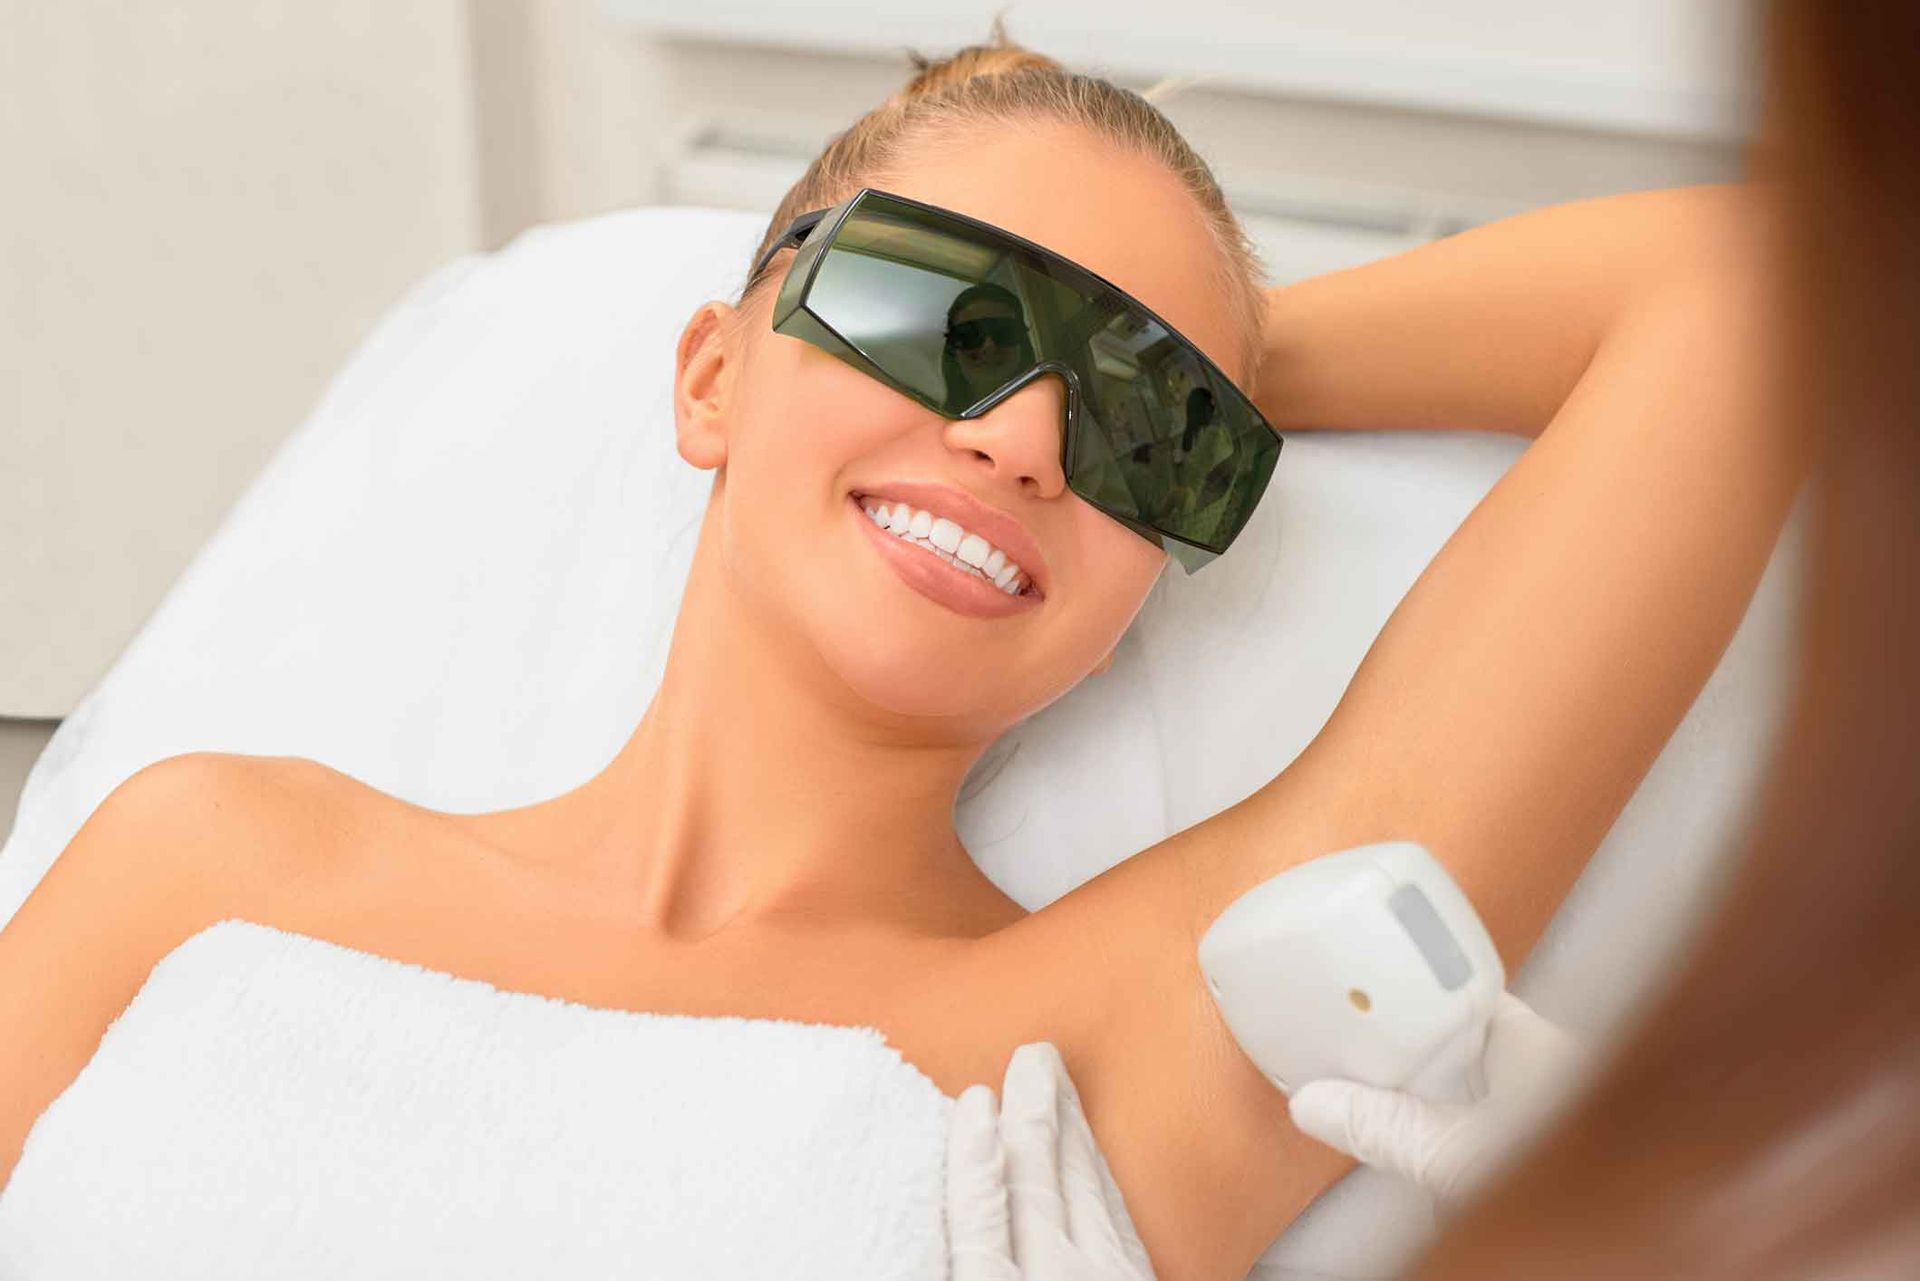 A woman is getting a laser treatment on her face – Rapid Creek, NT - Urban Wax & Beauty